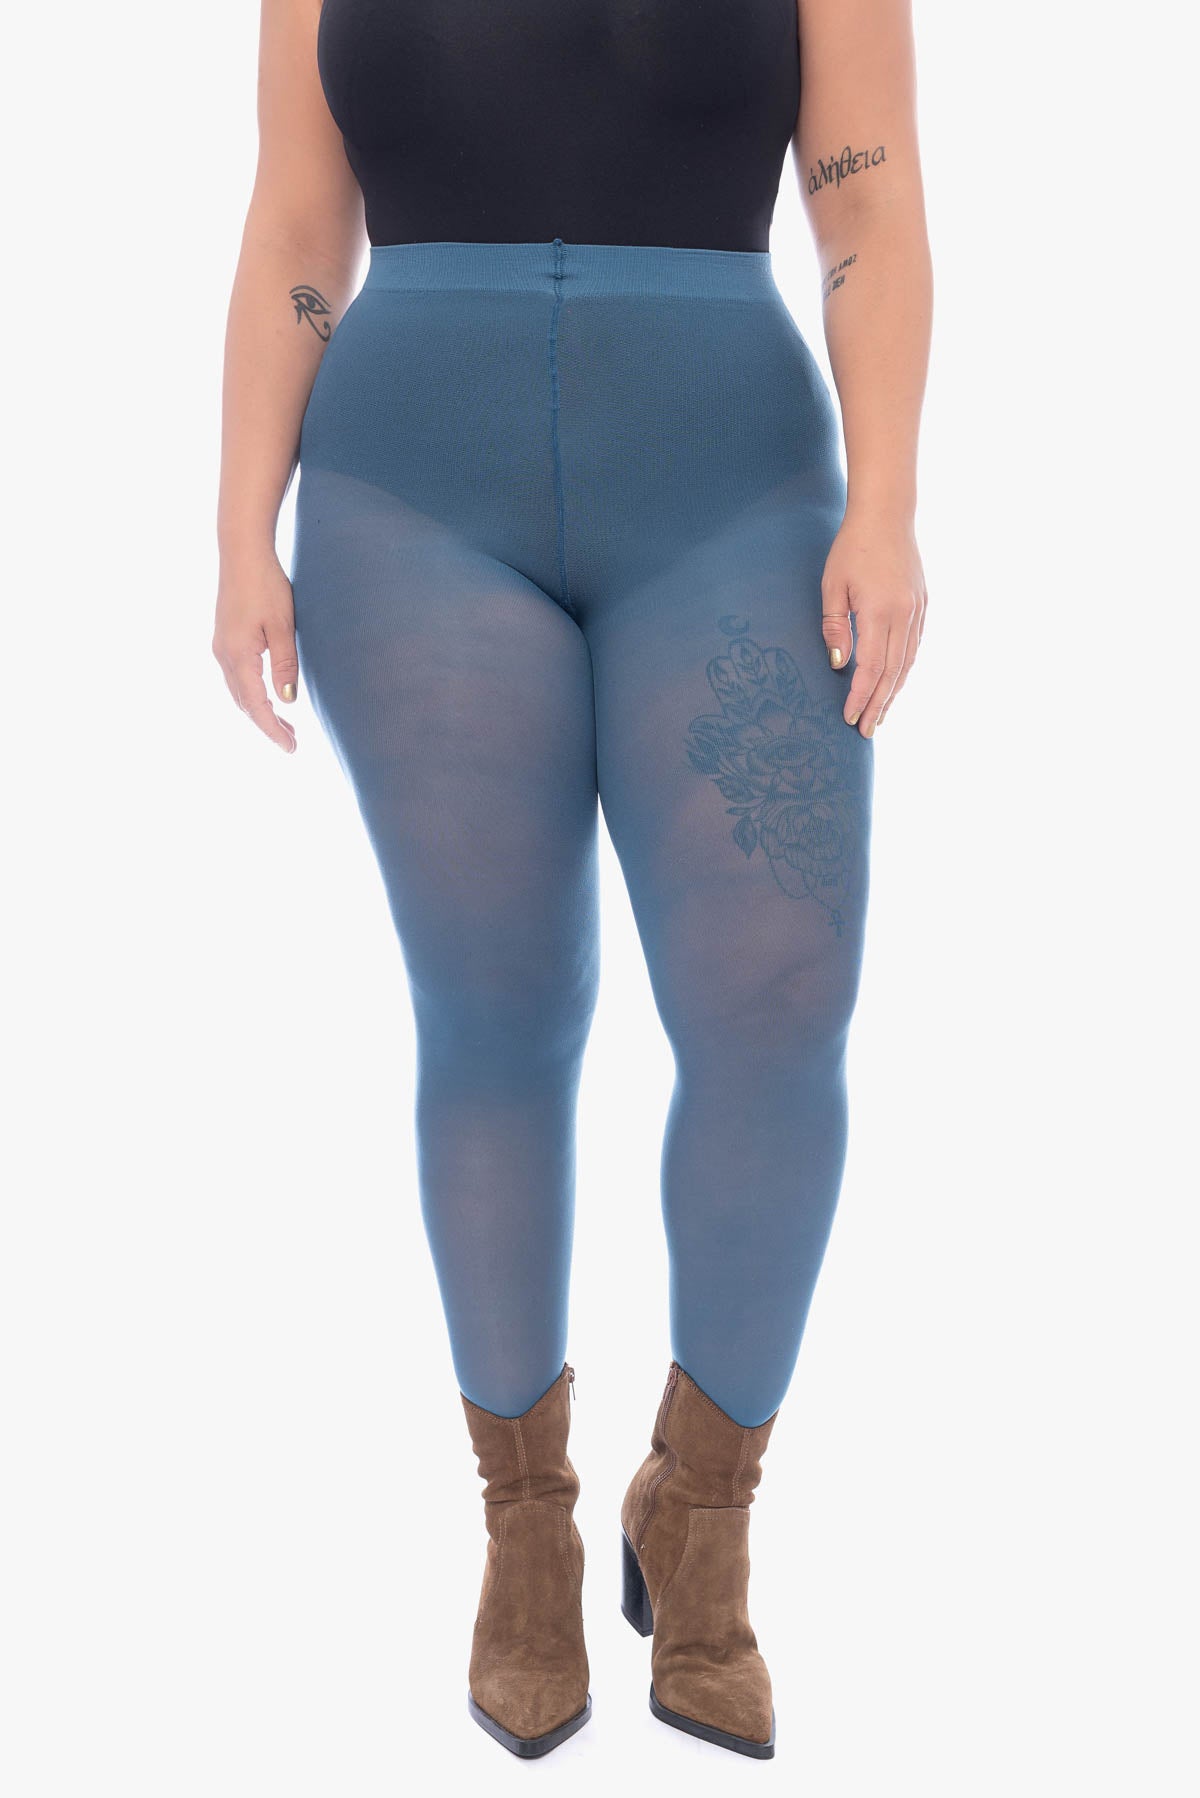 Buttery Smooth Merry Christmas Treats and Cookies Extra Plus Size Leggings  - 3X-5X | Only Leggings